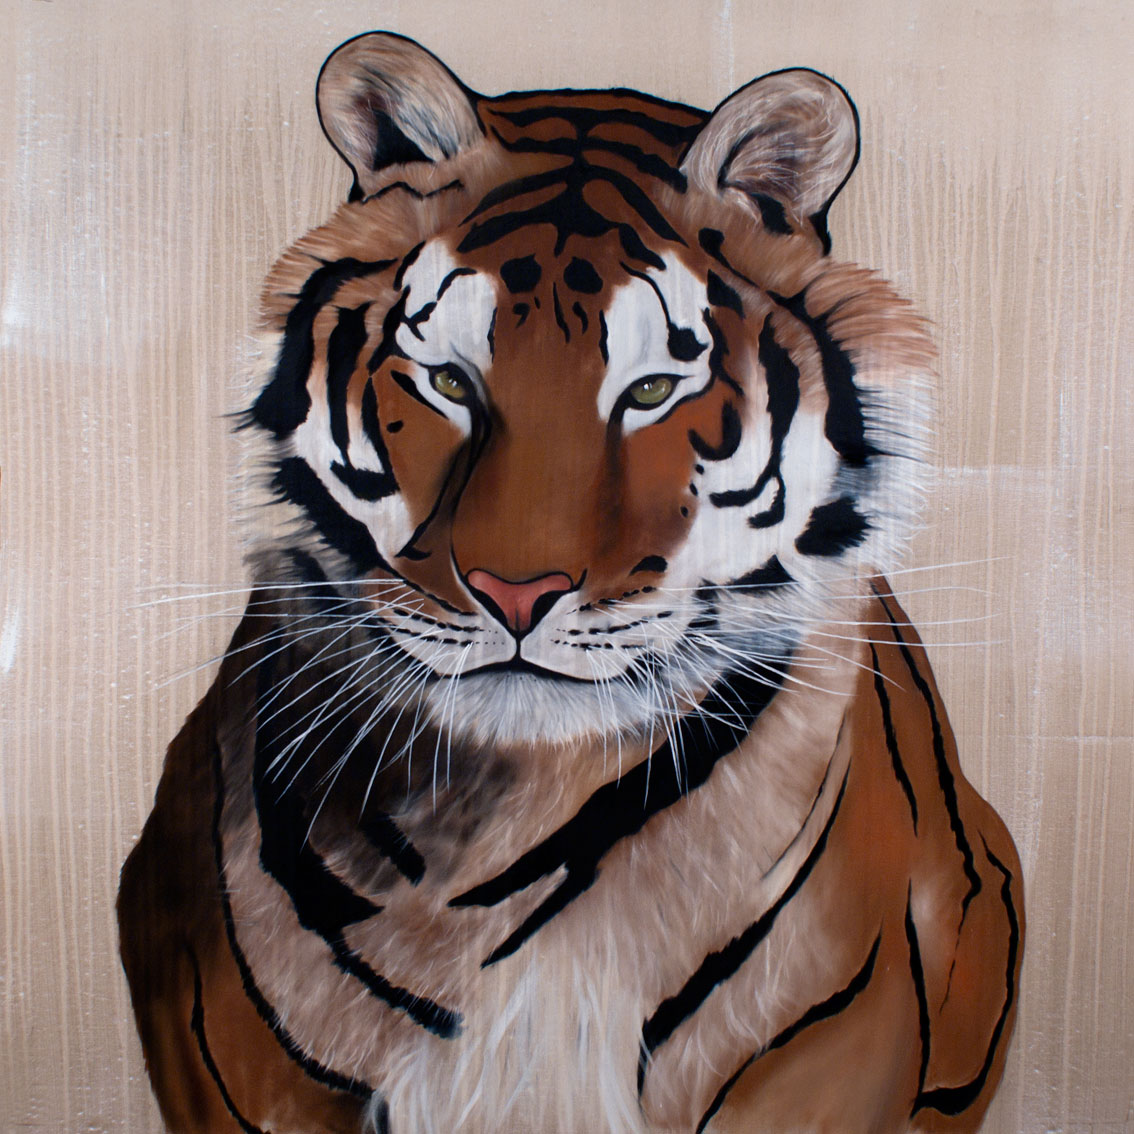 PANTHERA TIGRIS ALTAICA tiger-royal-siberian-panthera-tigris-decoration-large-size-printed-canvas-luxury-high-quality Thierry Bisch Contemporary painter animals painting art  nature biodiversity conservation 